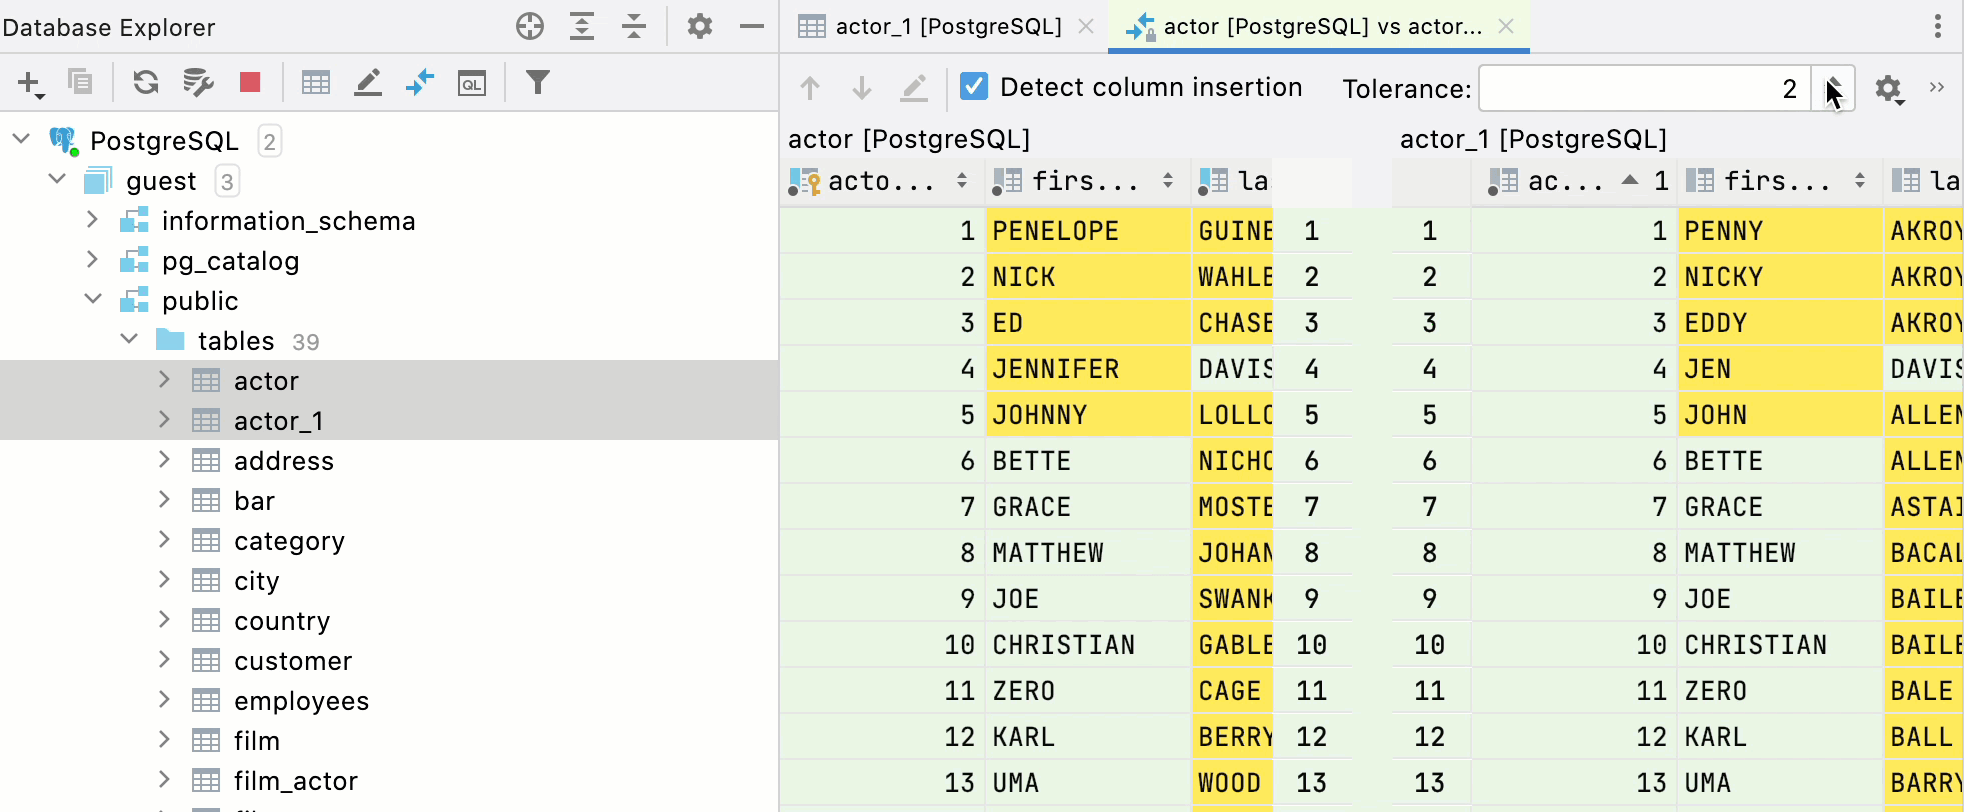 Compare two tables from the Database tool window